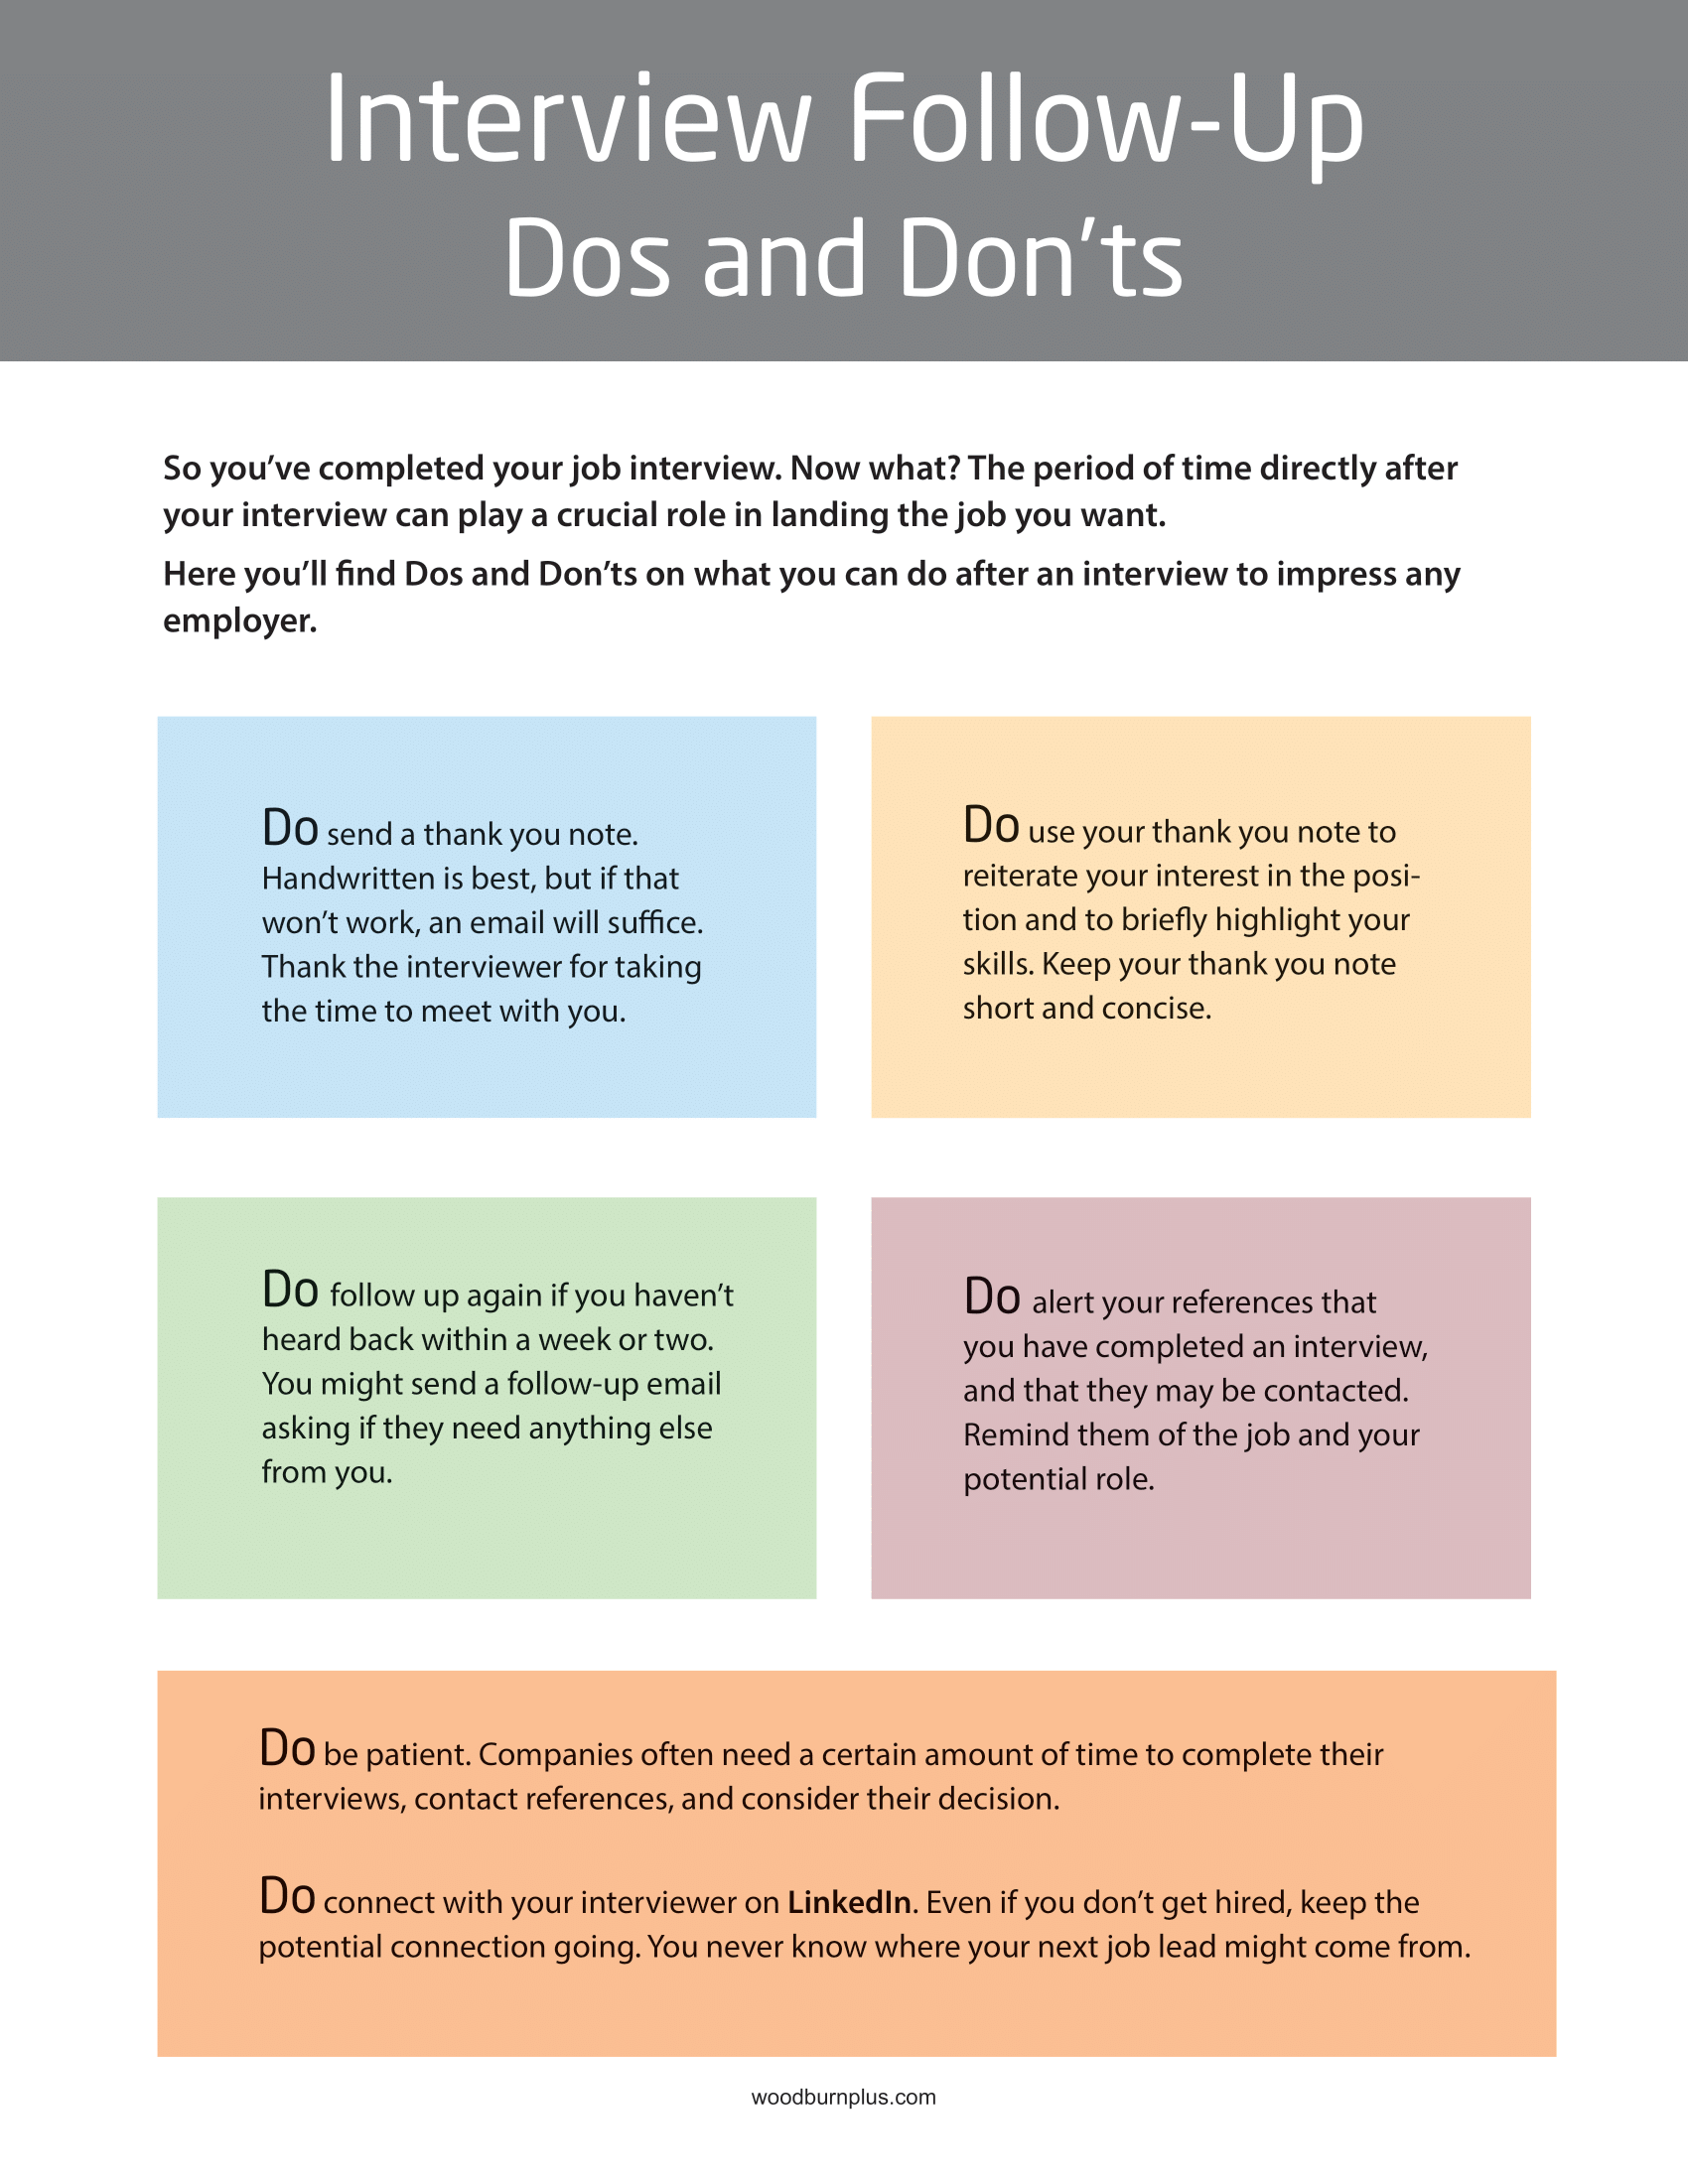 Interview Follow-Up Dos and Don'ts